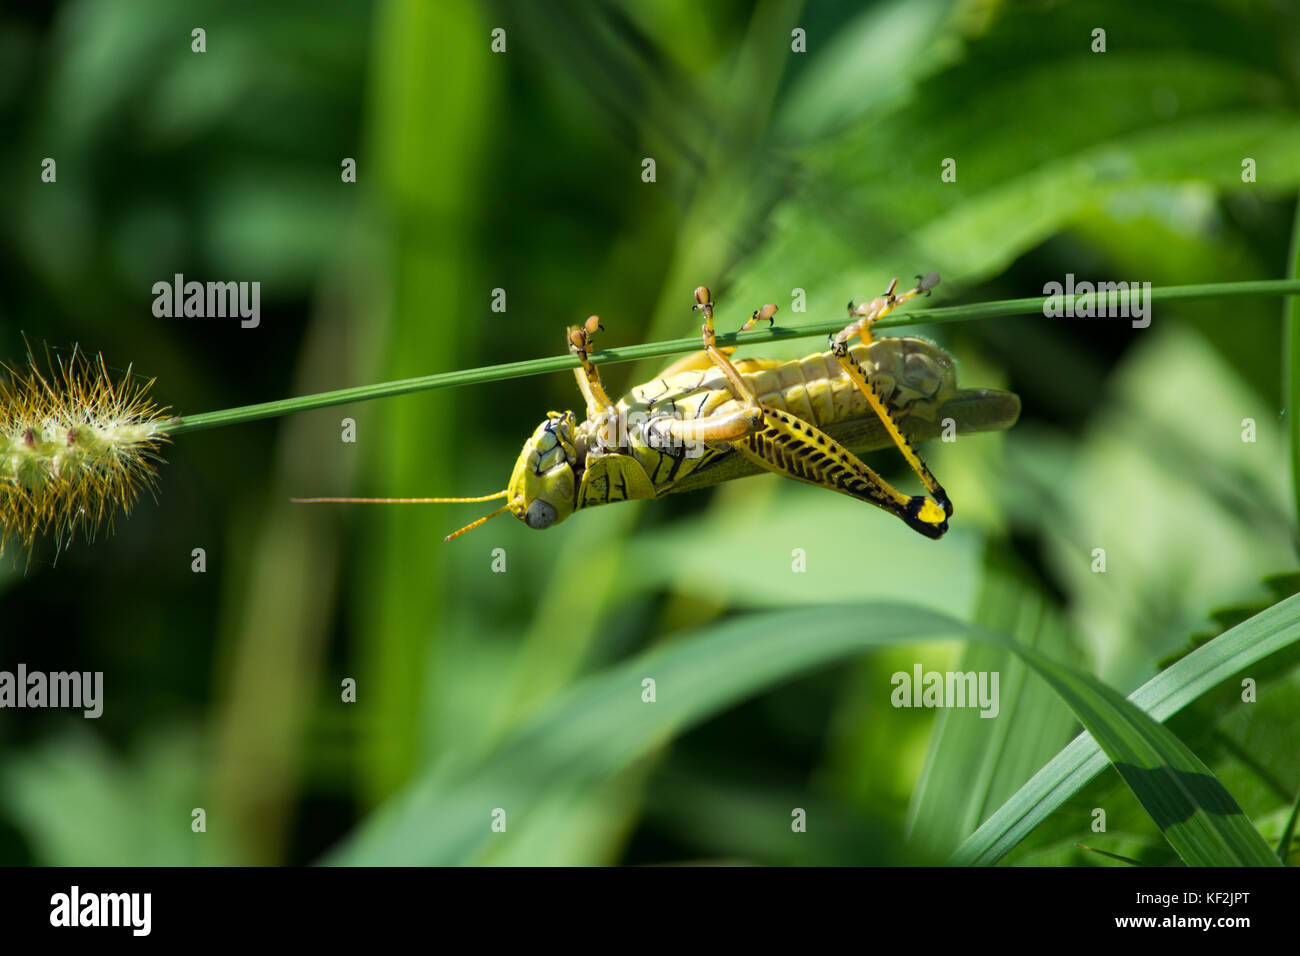 Green grasshopper just hanging around on a plant. Stock Photo